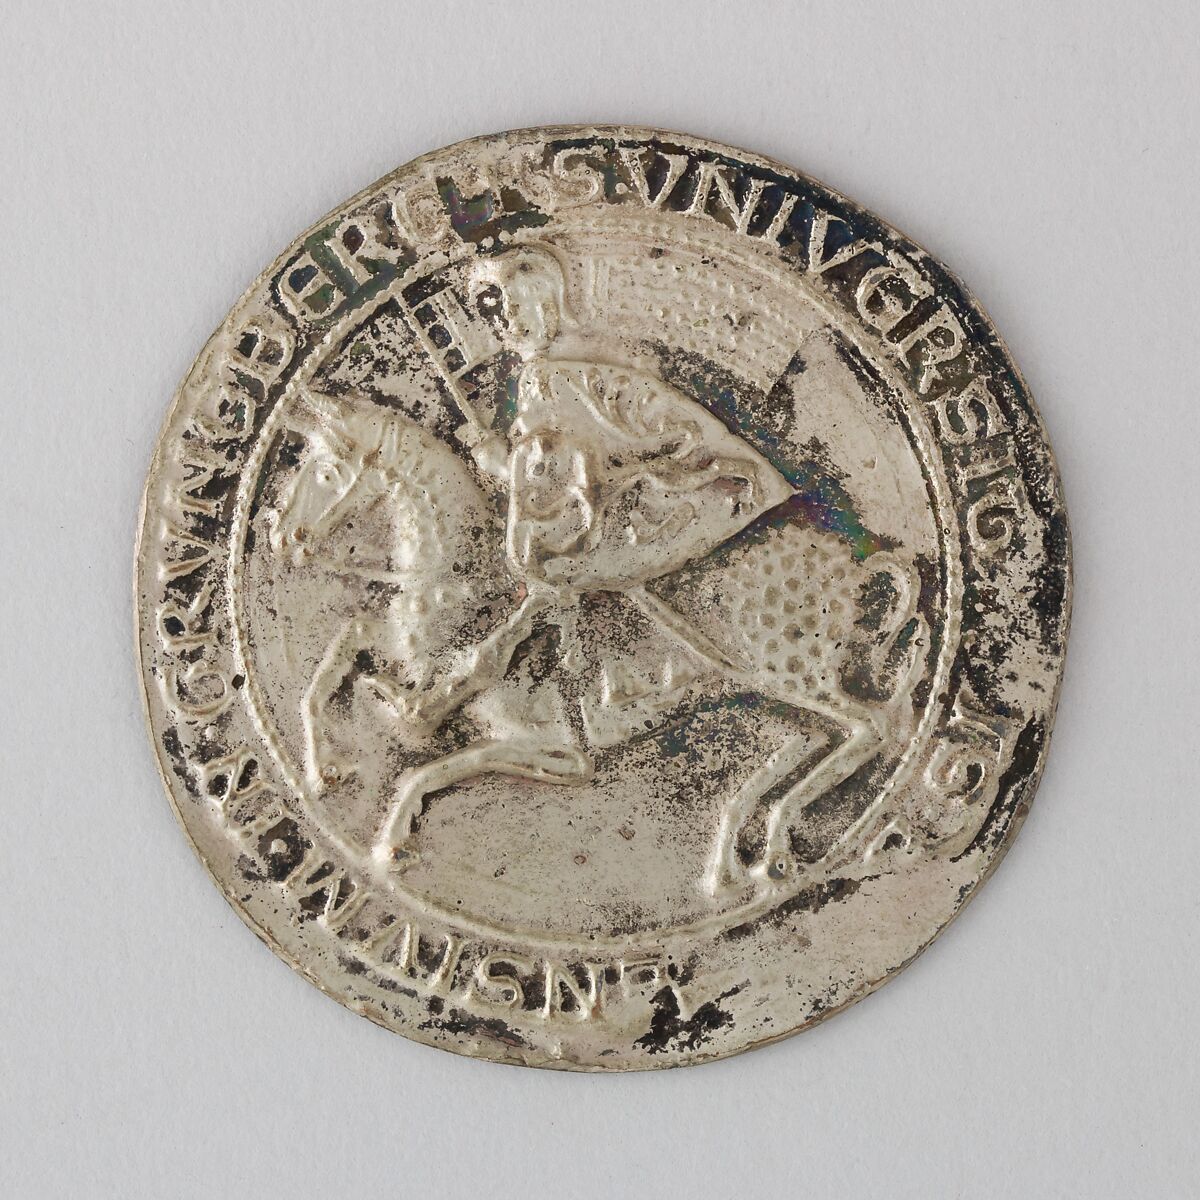 Reproduction of the Seal of Grüneberg Stadt, 1250, Elecrotype, German 